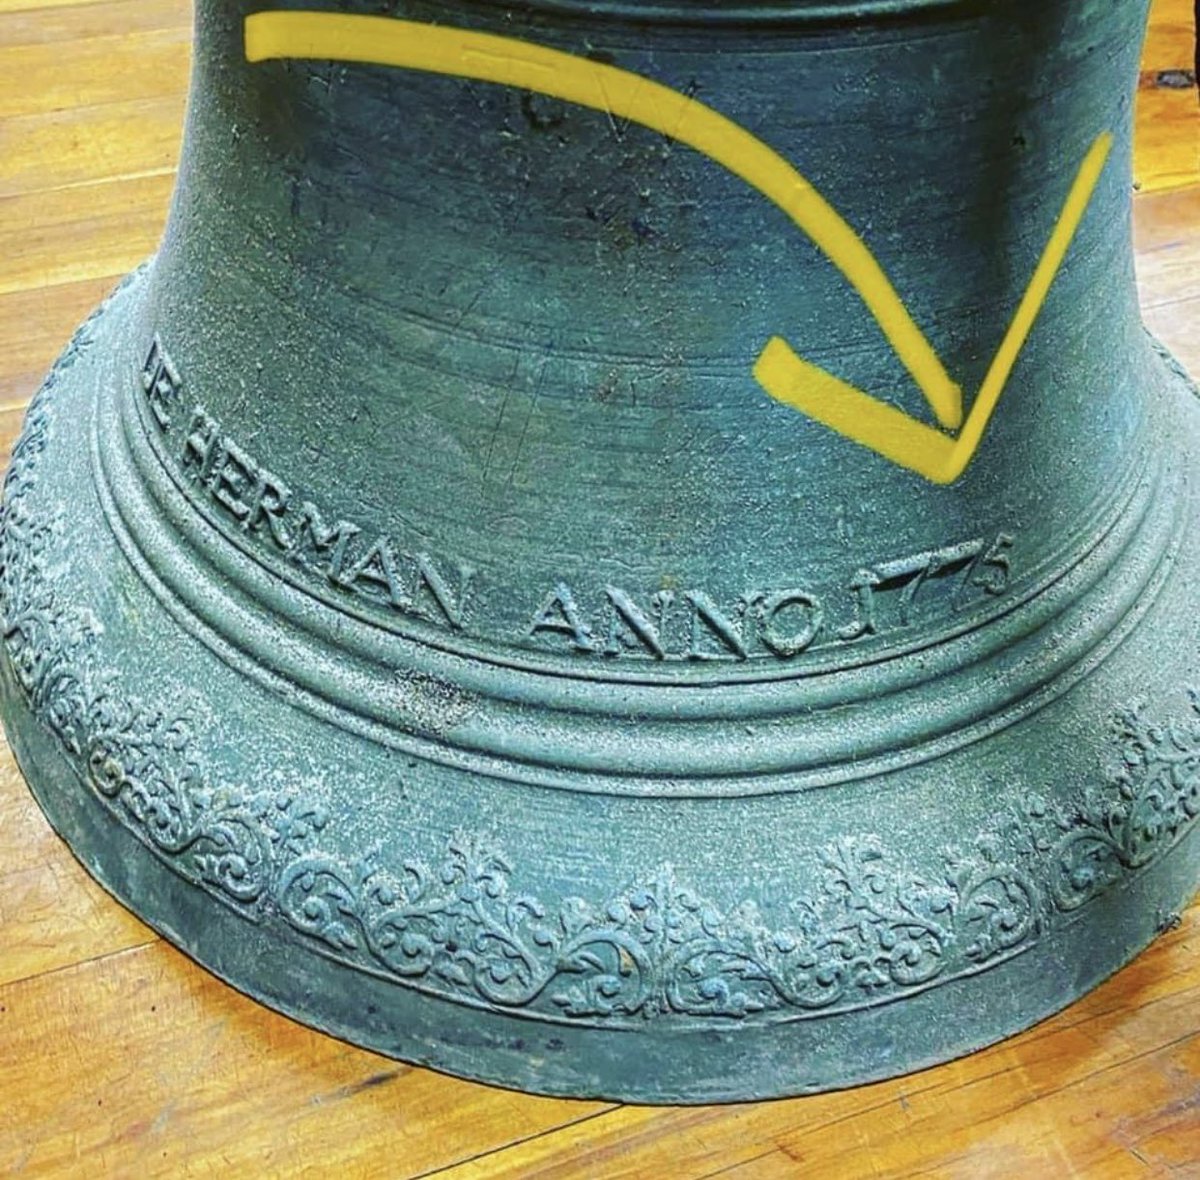 Pre-colony 1775 church bell to be restored by 1840 Garrison Church #millerspoint so it may ring again after many years. Cast in Belgium in 1775 but how did it get here? First fleet? The research commences ...